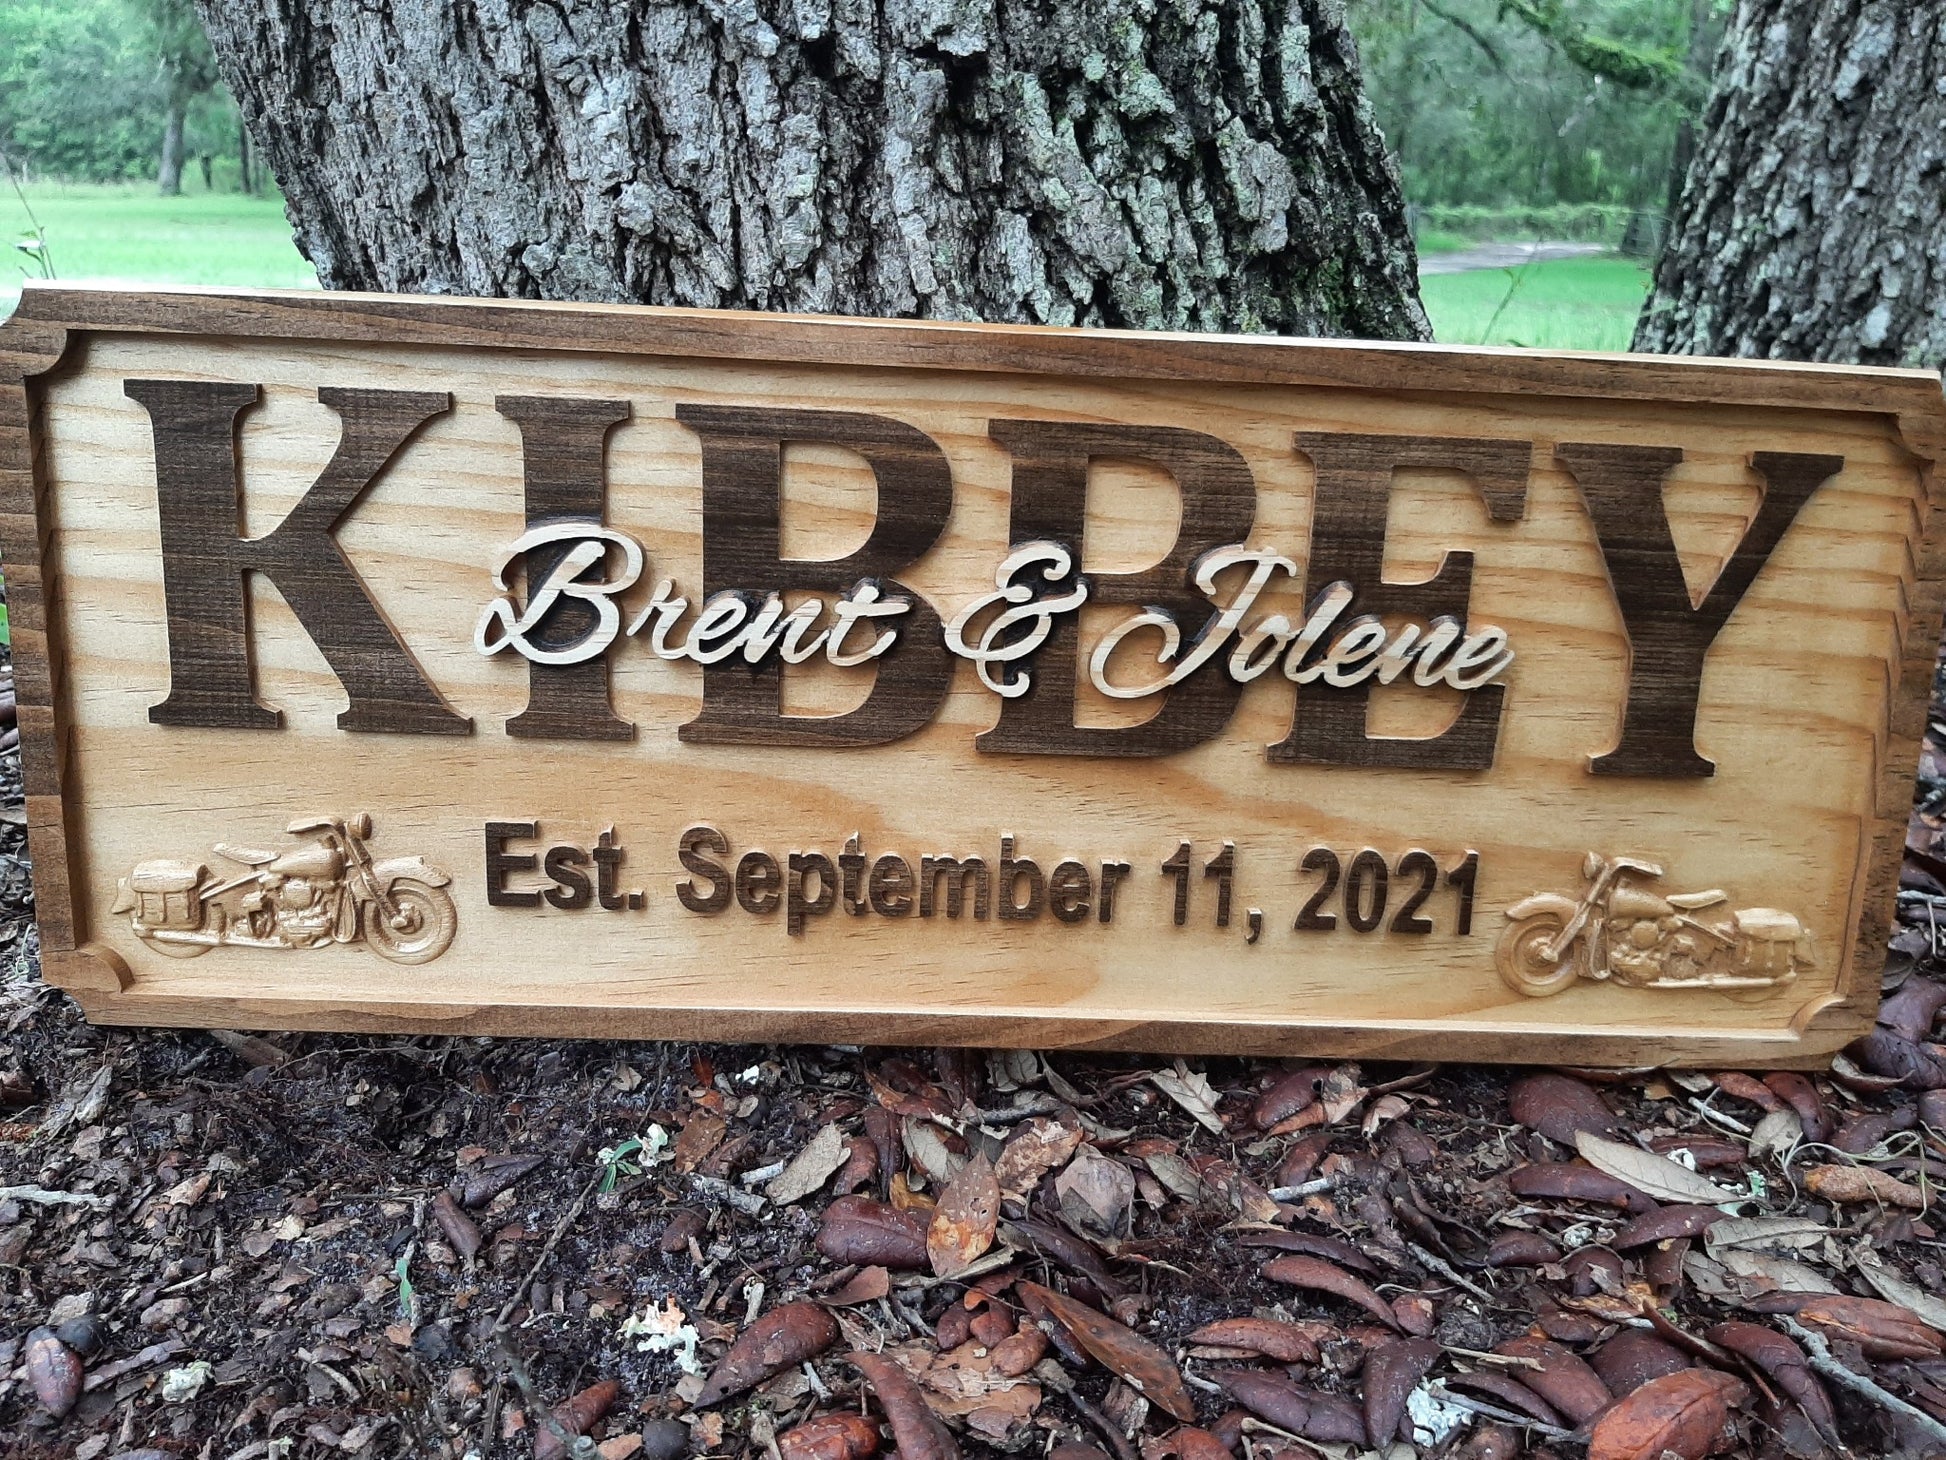 Wedding gift family name sign with Harley Davidson motorcycles